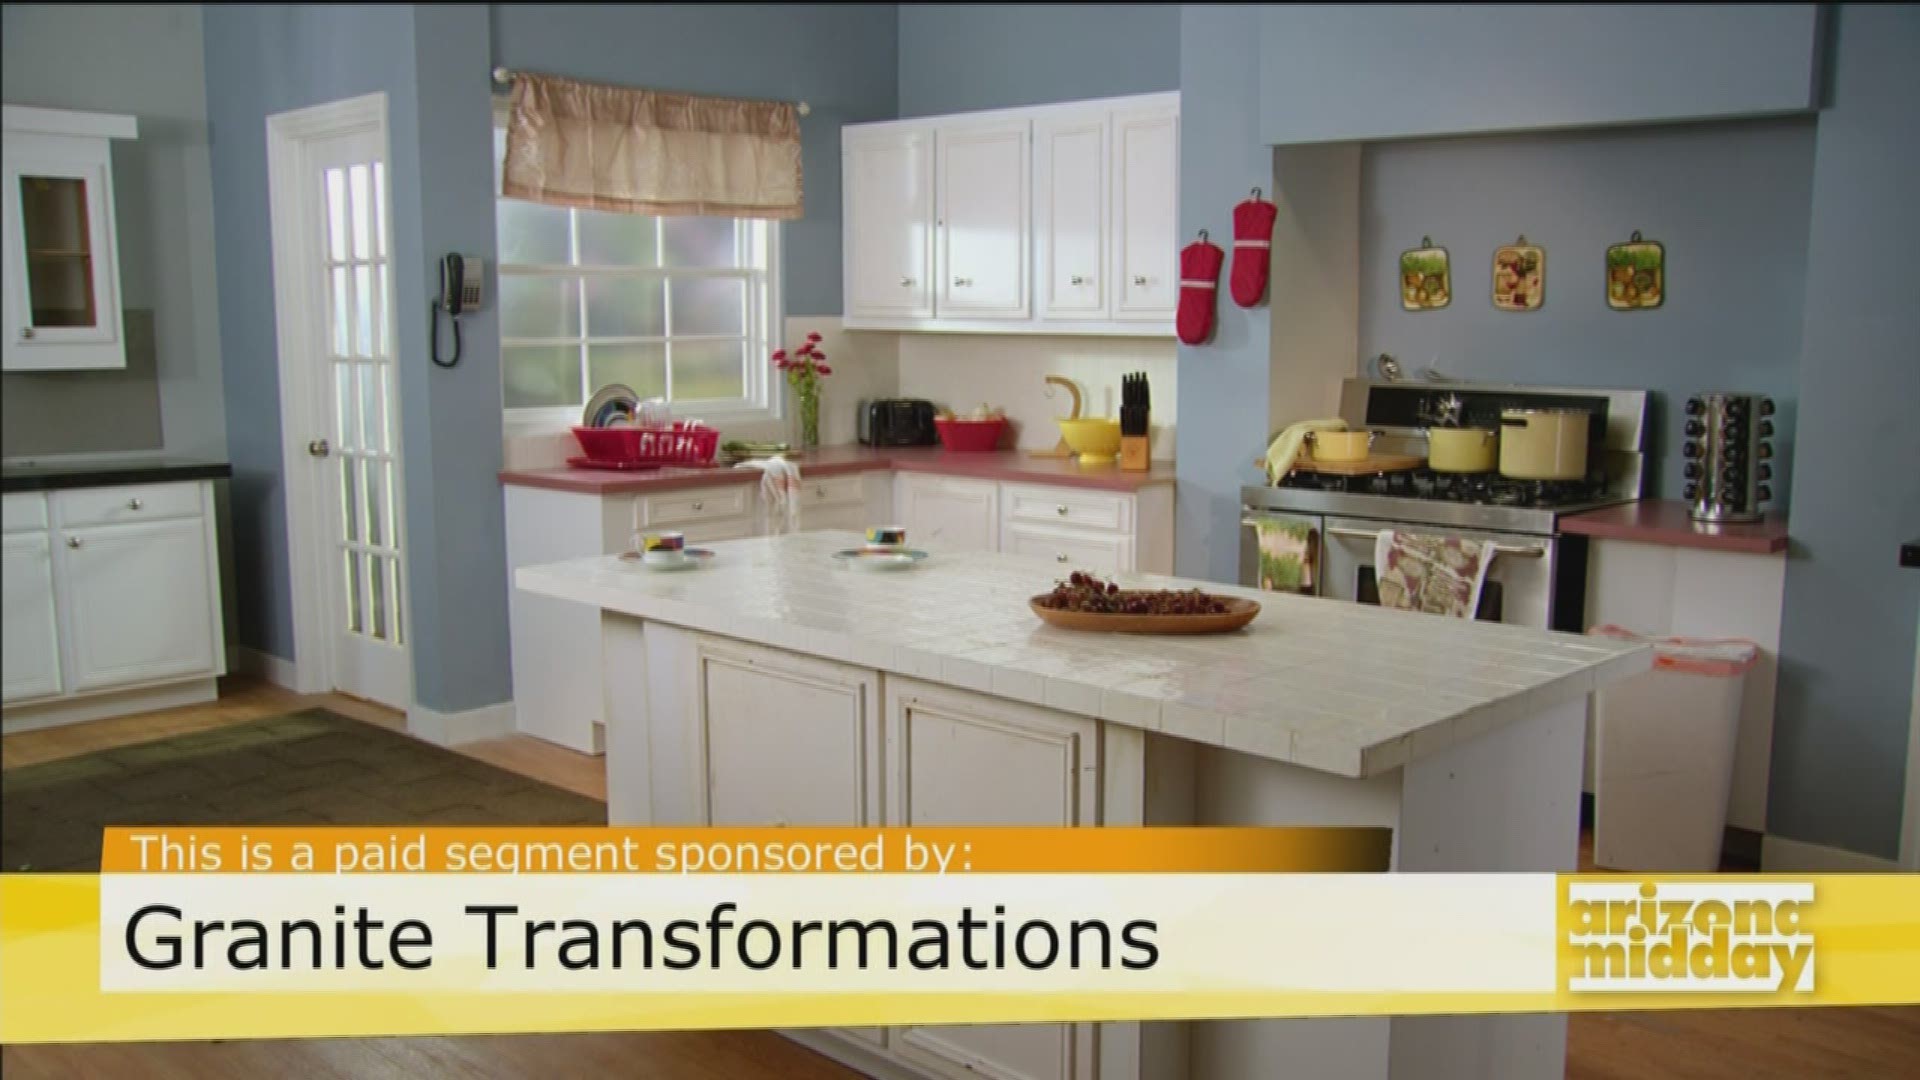 Derek Wood gives us the scoop on how we can make our kitchen look brand new with help from Granite Transformations.